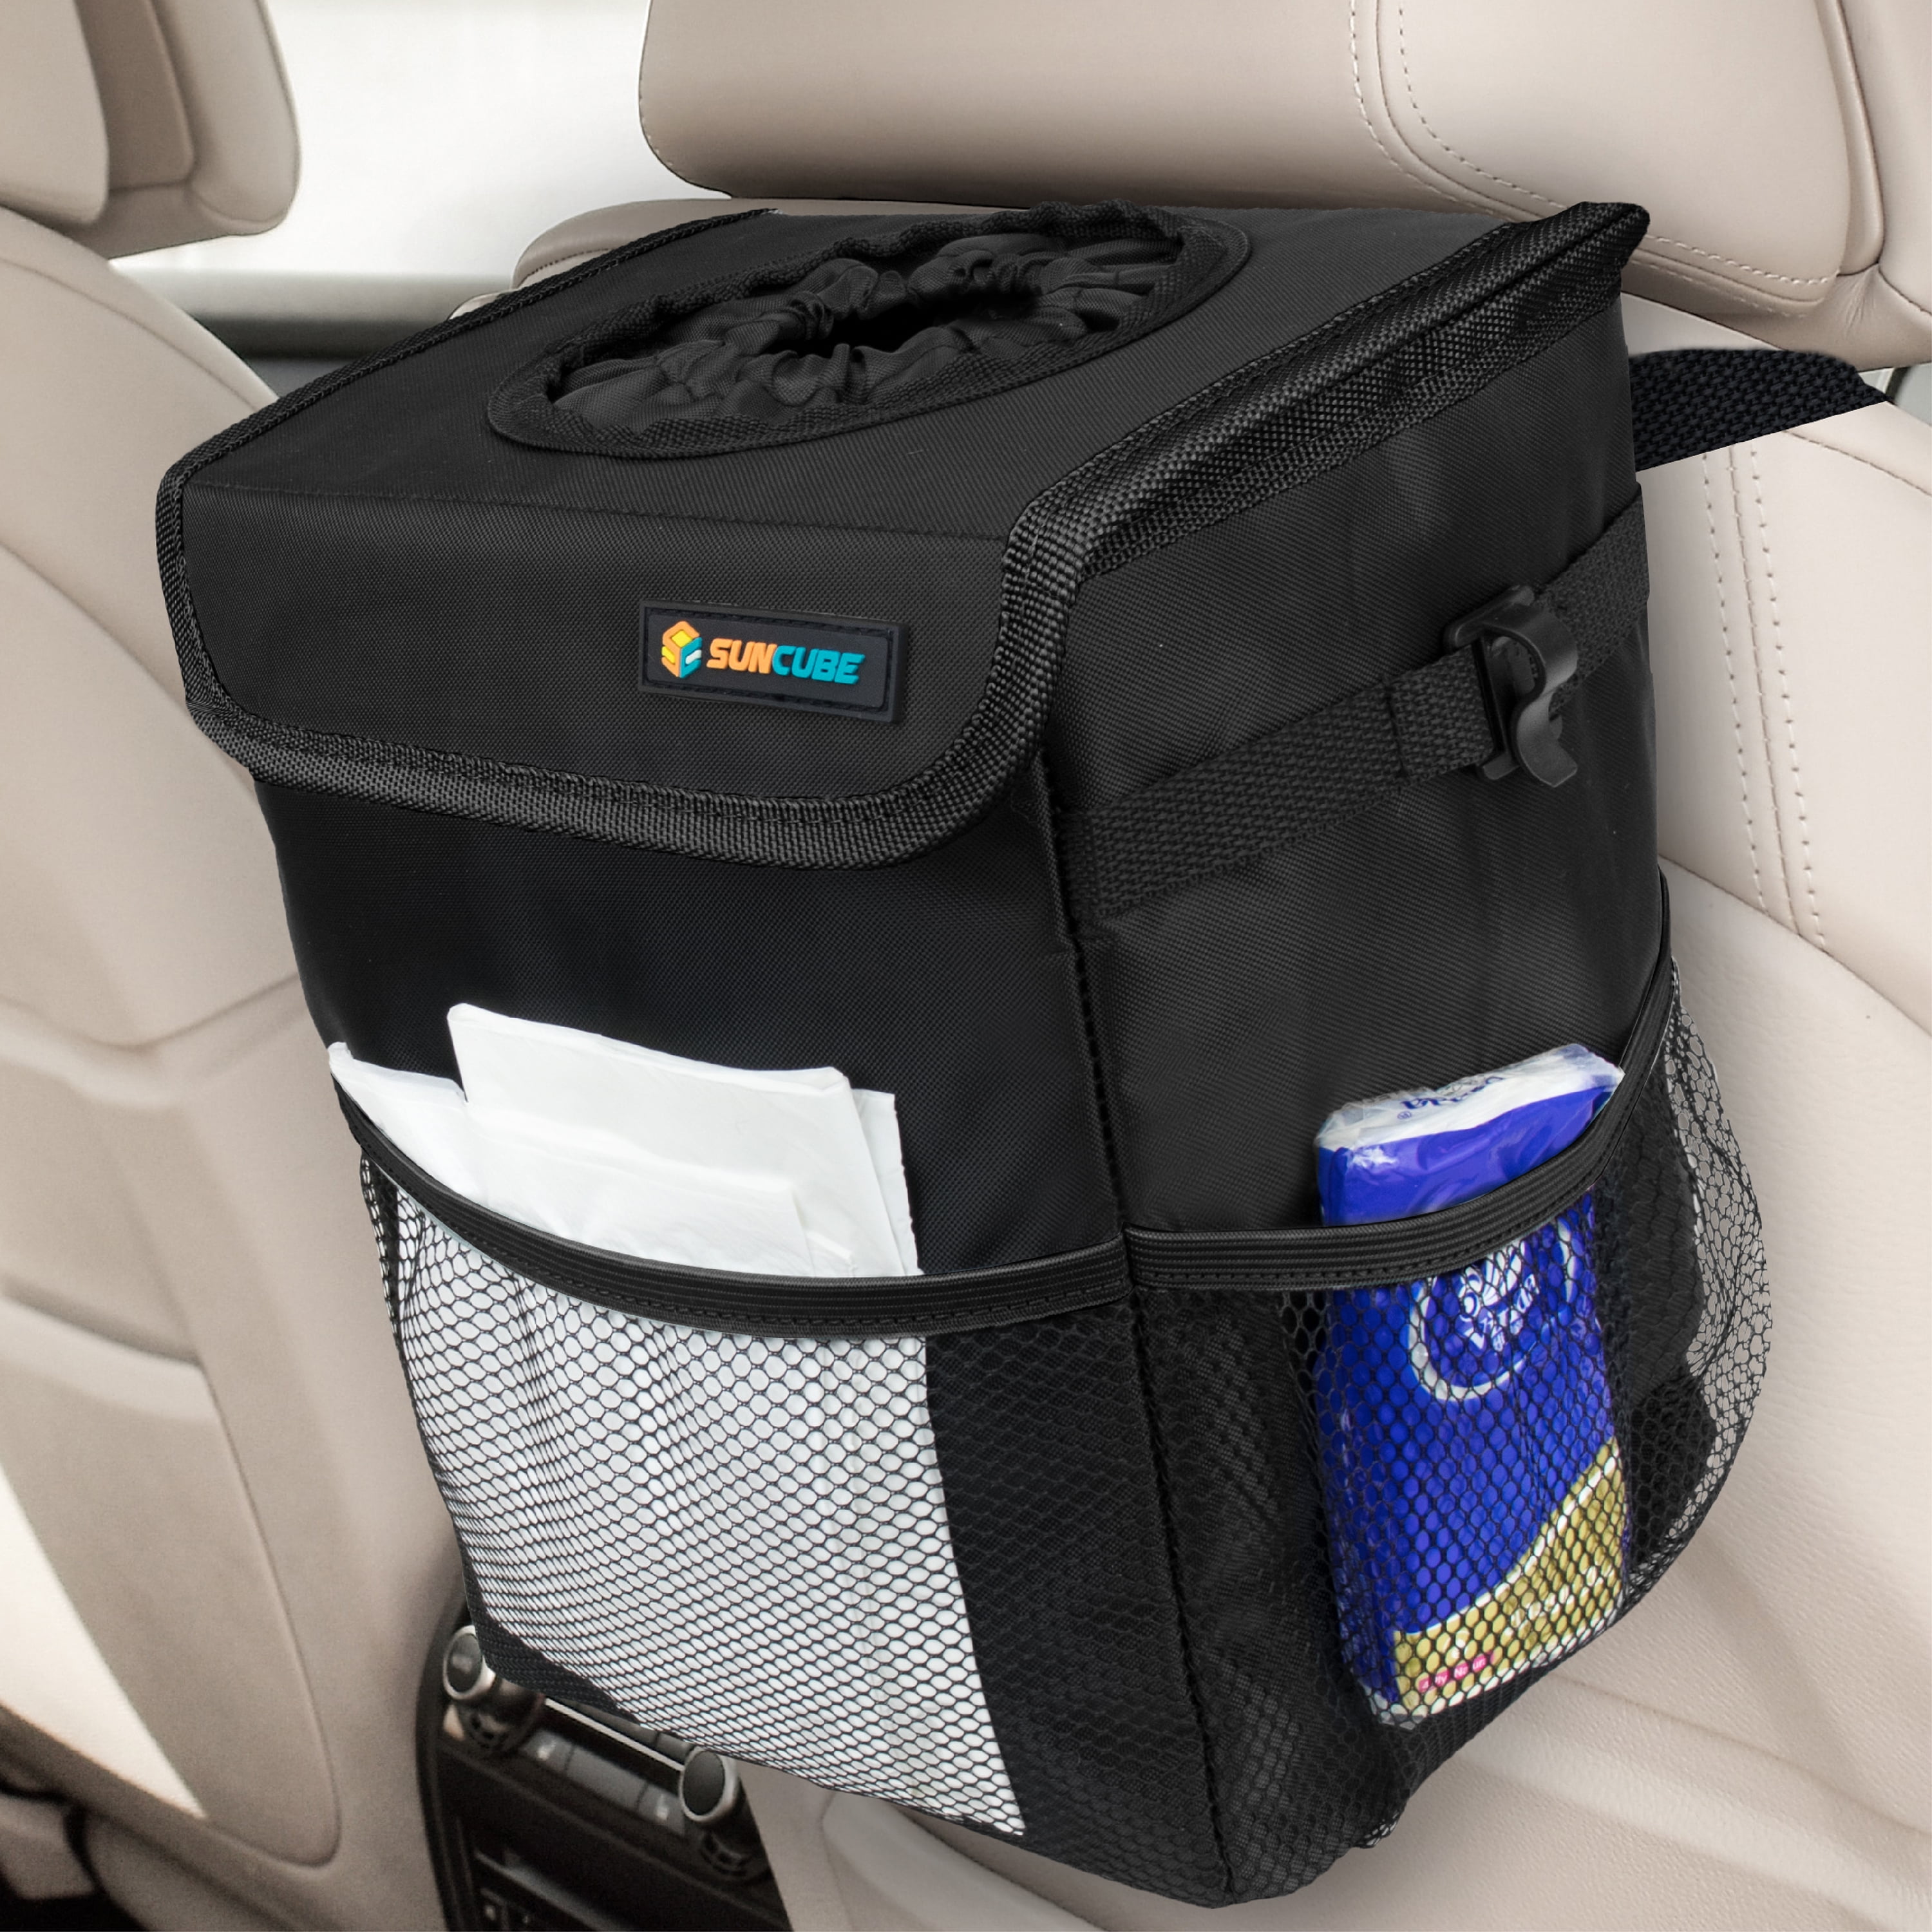 SUN CUBE WATERPROOF Car Trash Can with Lid, Mesh Pockets